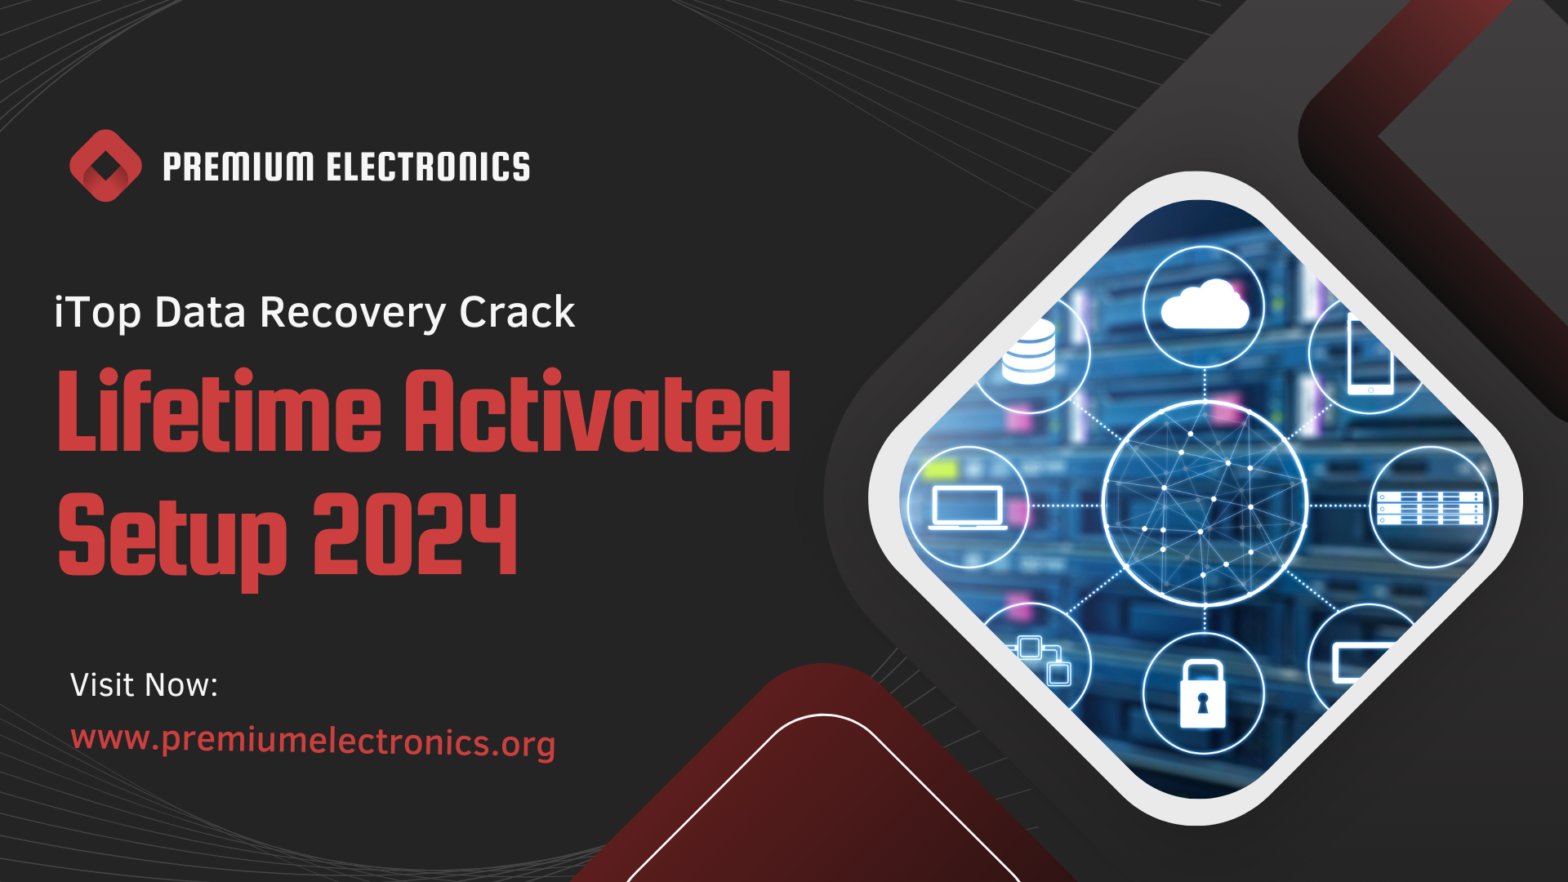 iTop Data Recovery Crack v4.0.0.475 Lifetime